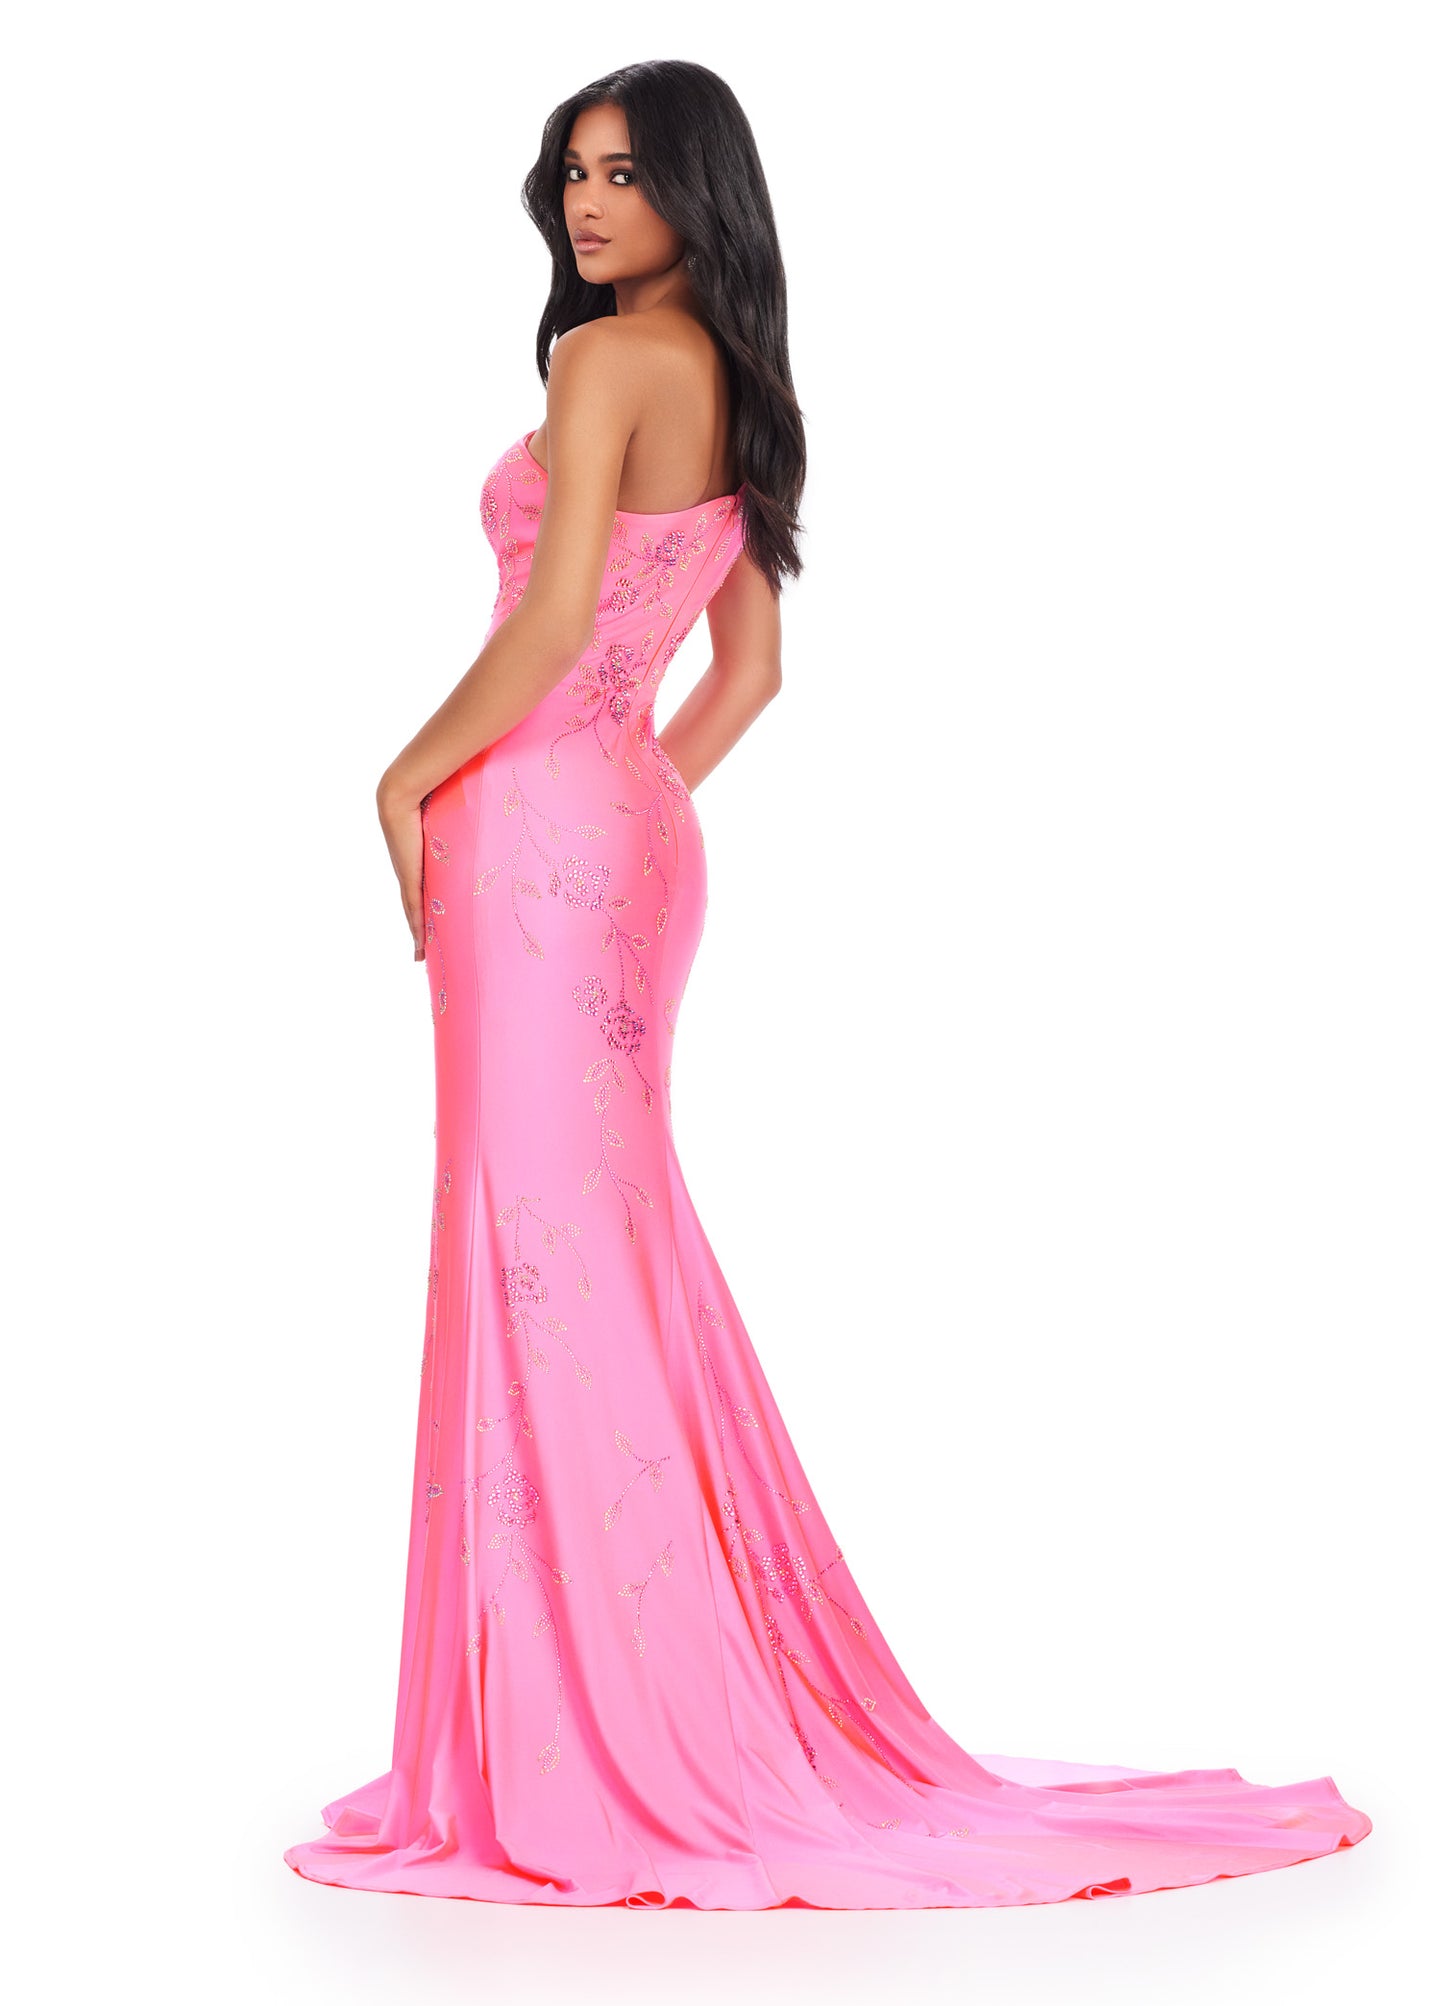 Make a stunning entrance in the Ashely Lauren 11525 Long Prom Dress. Featuring a one shoulder design and a press on floral bead pattern, this gown exudes sophistication and elegance. The jersey fabric offers a comfortable and flattering fit, perfect for any formal occasion. Make a statement in this pageant-worthy gown. This one shoulder jersey gown features a delicate multi-colored heat set stone floral bead pattern that cascades down onto the skirt.